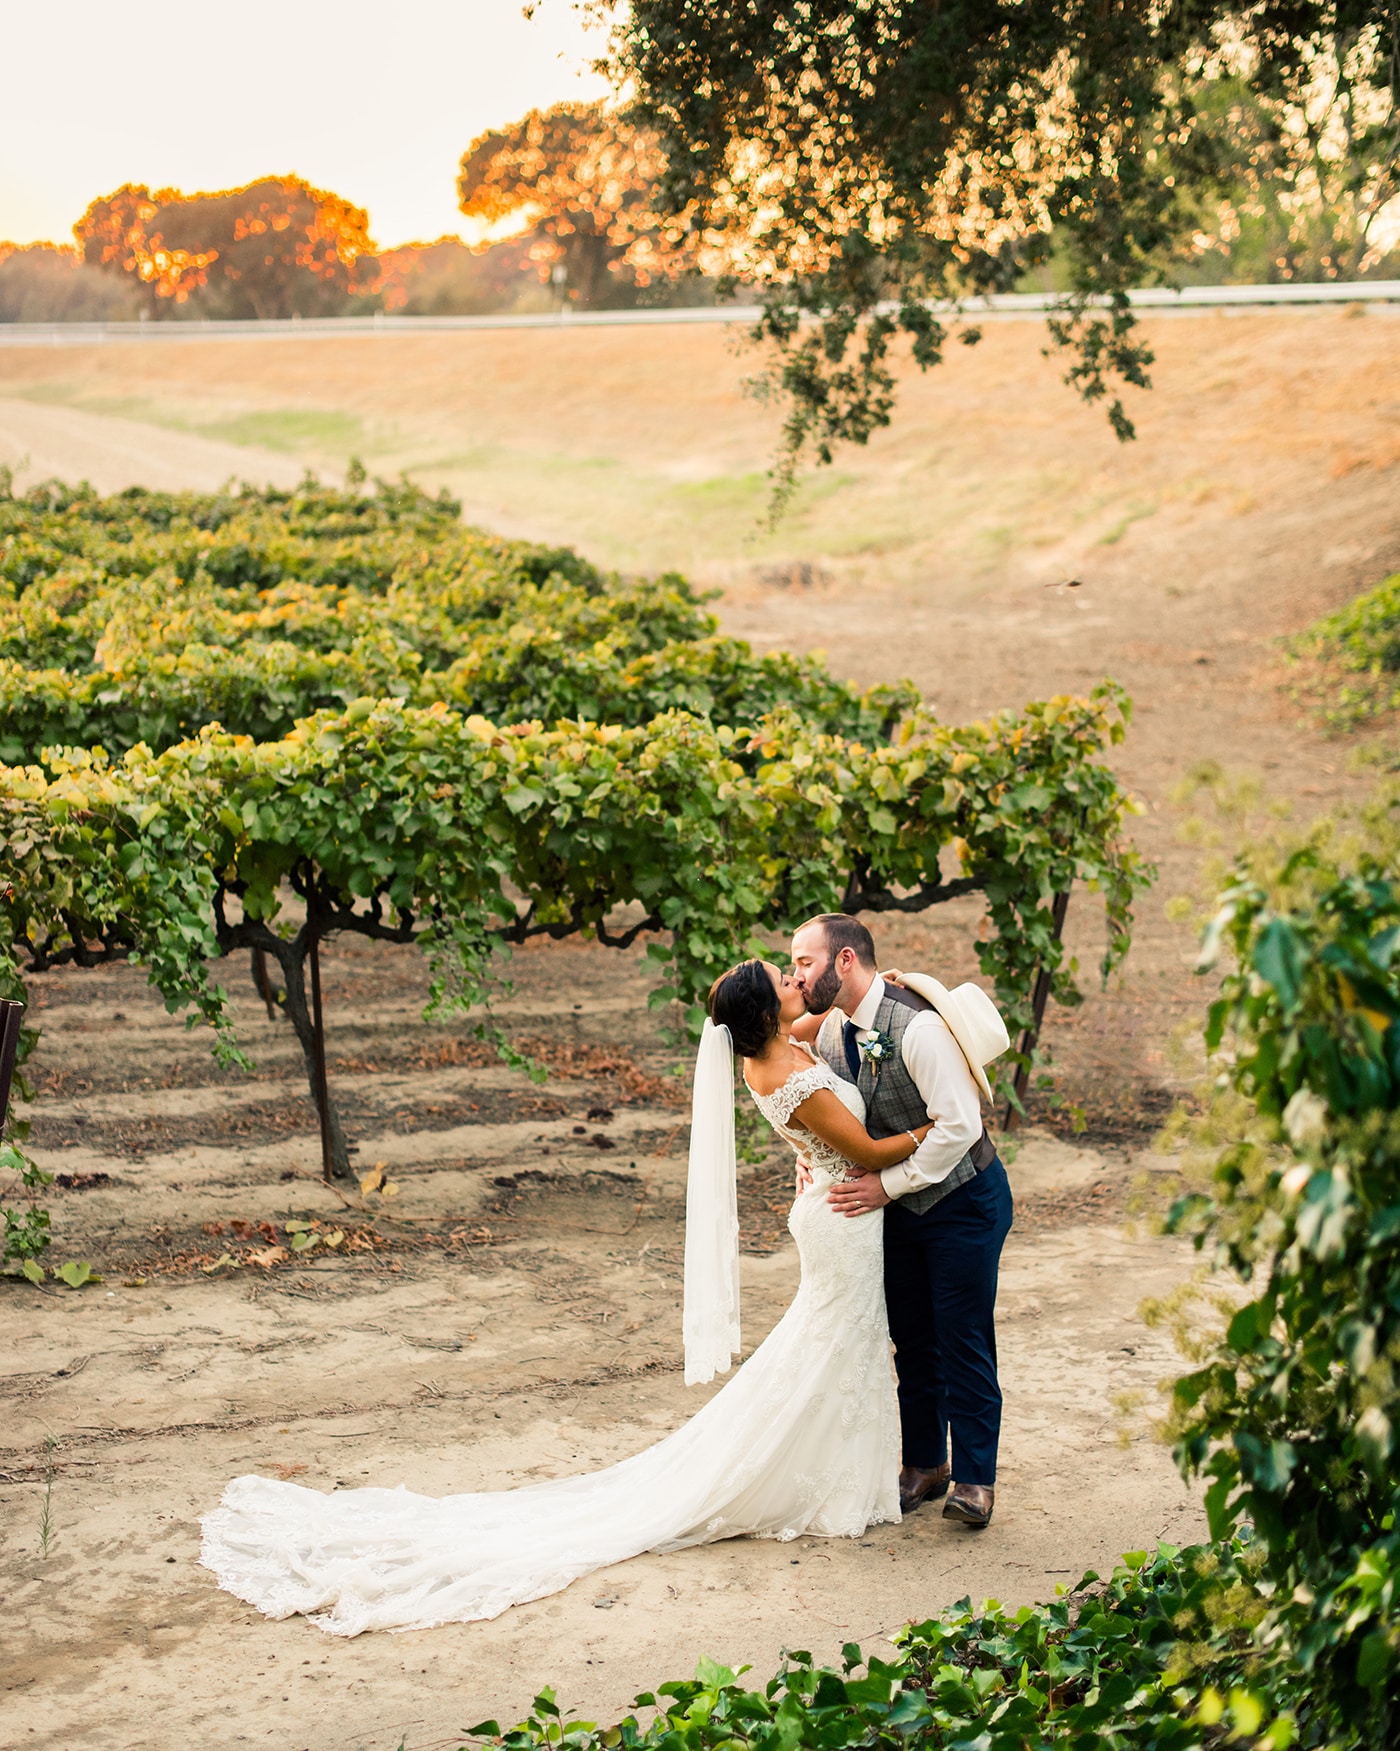 Bride and broom kiss beside grapevines at the end of their winery wedding.